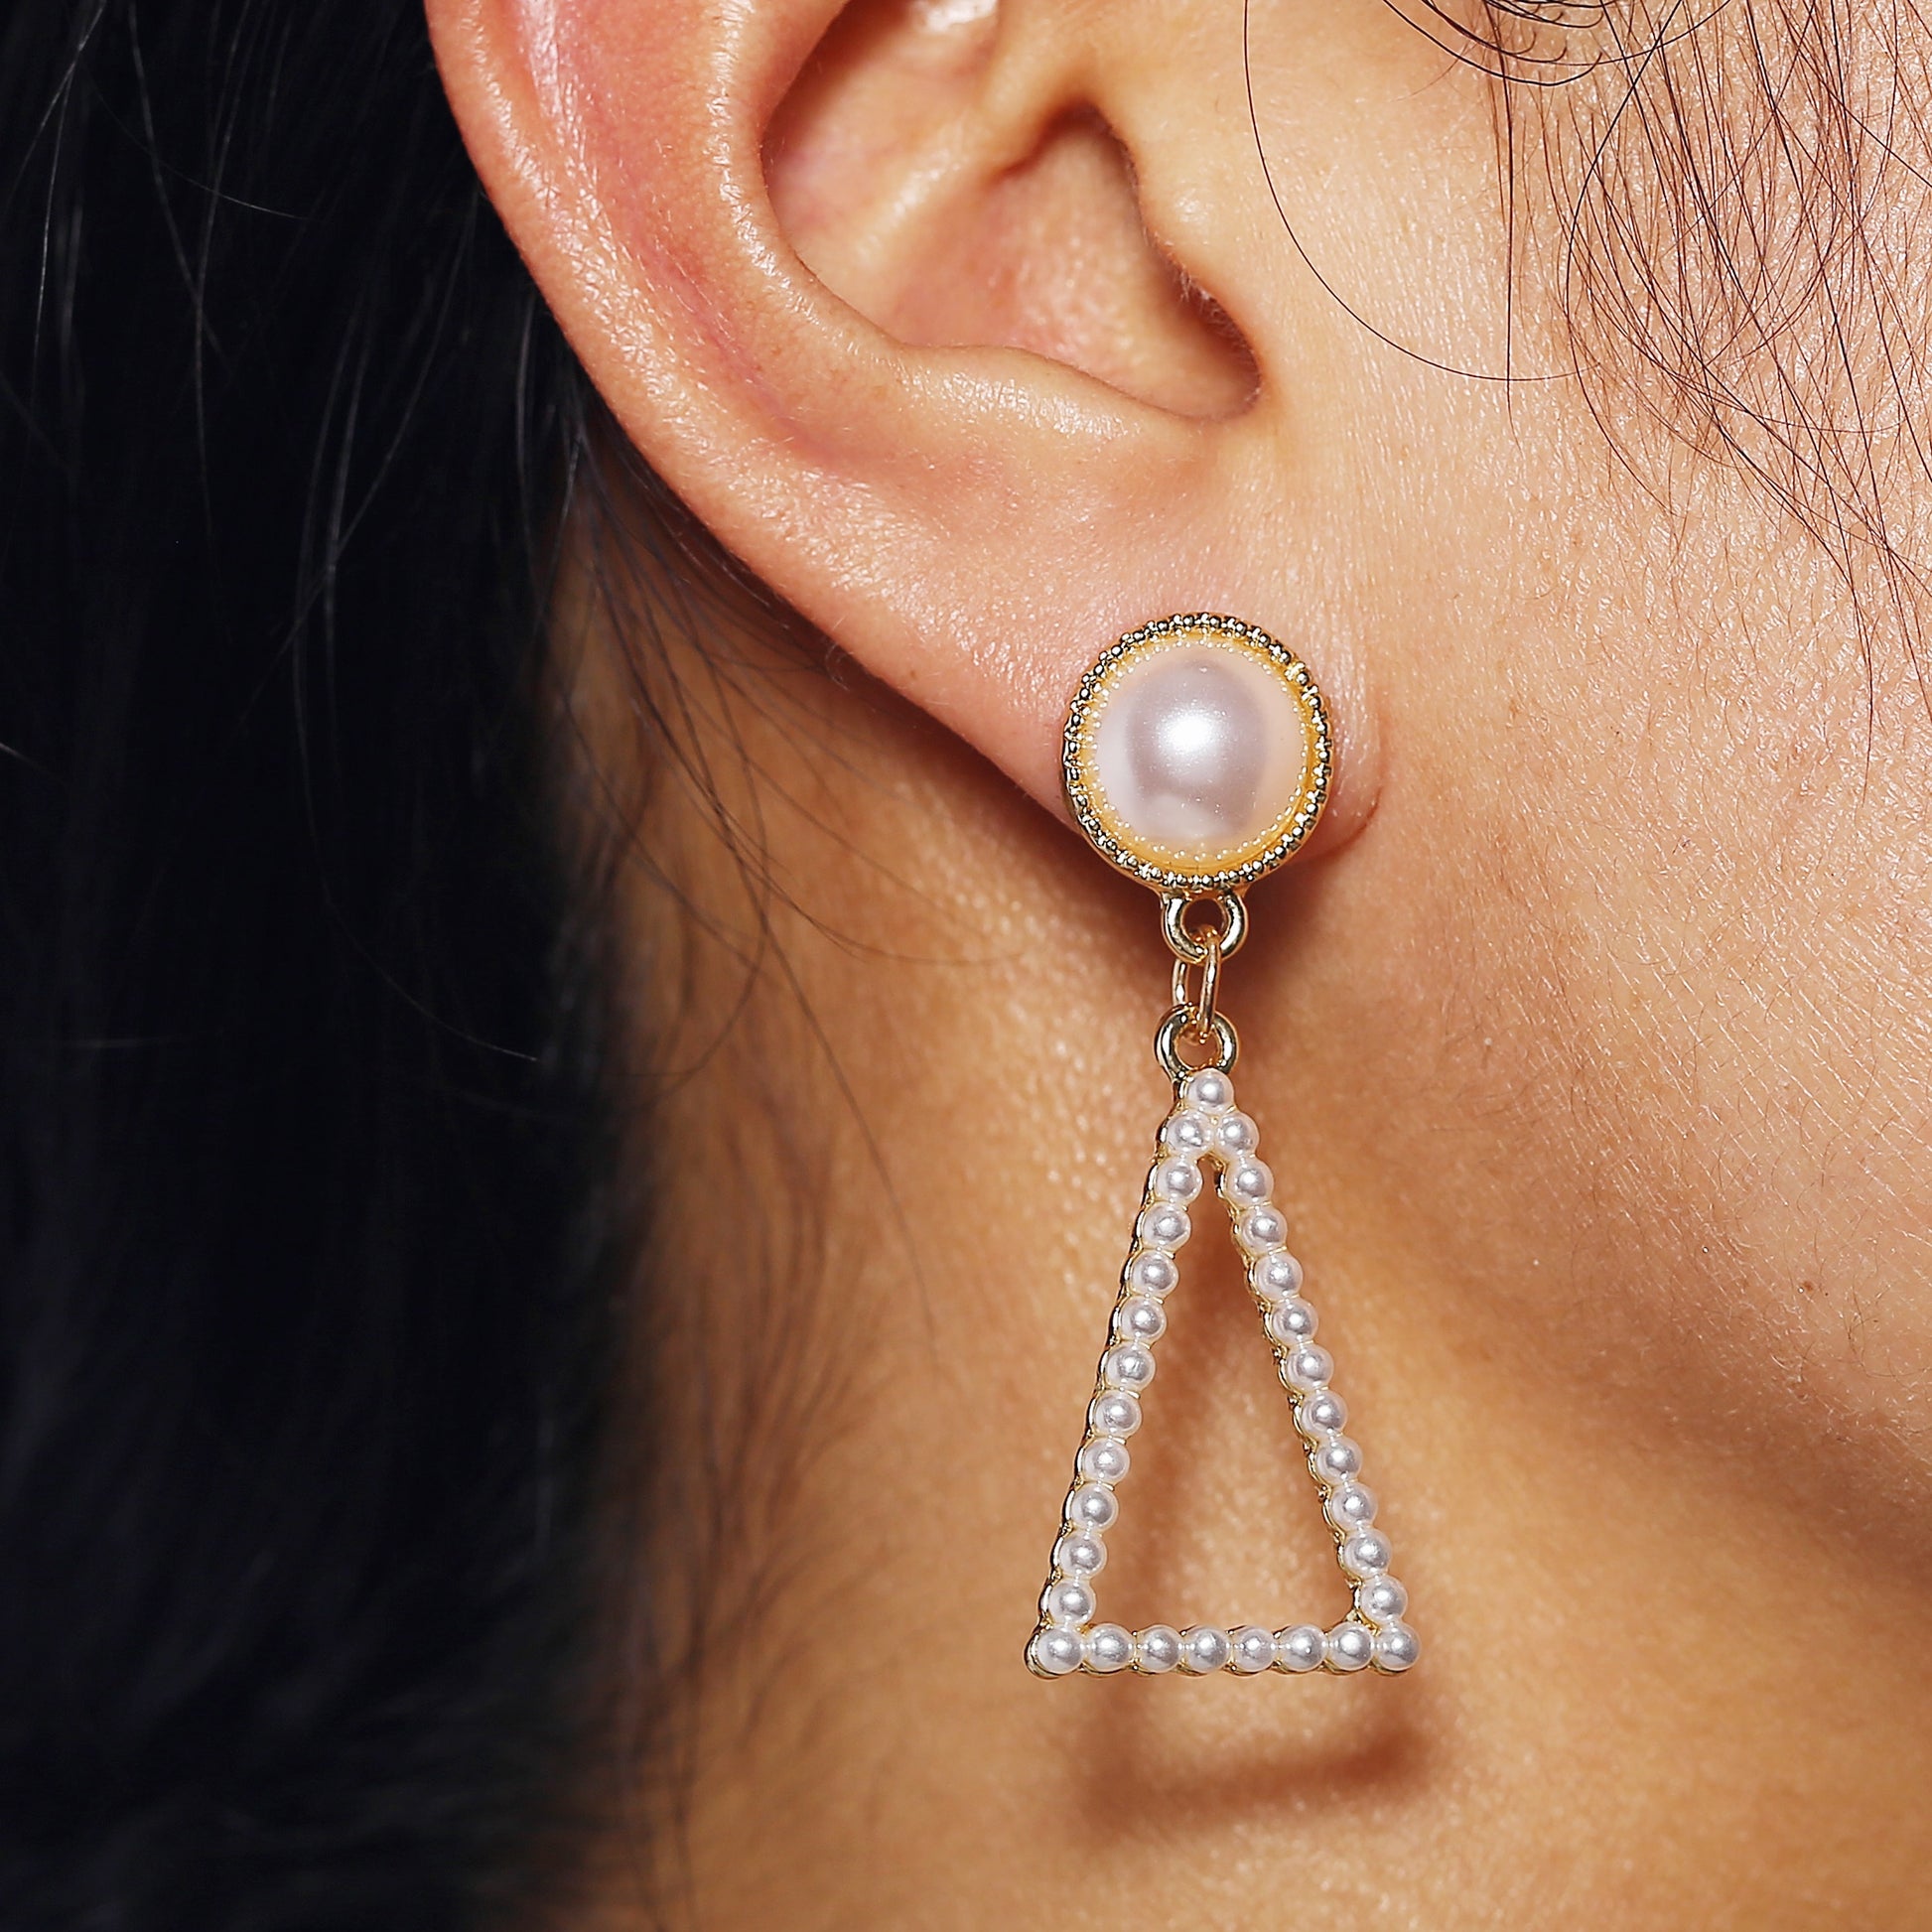 Statement Jewelry Big Triangle Pearl Drop Earrings with Zircon in Gold Color